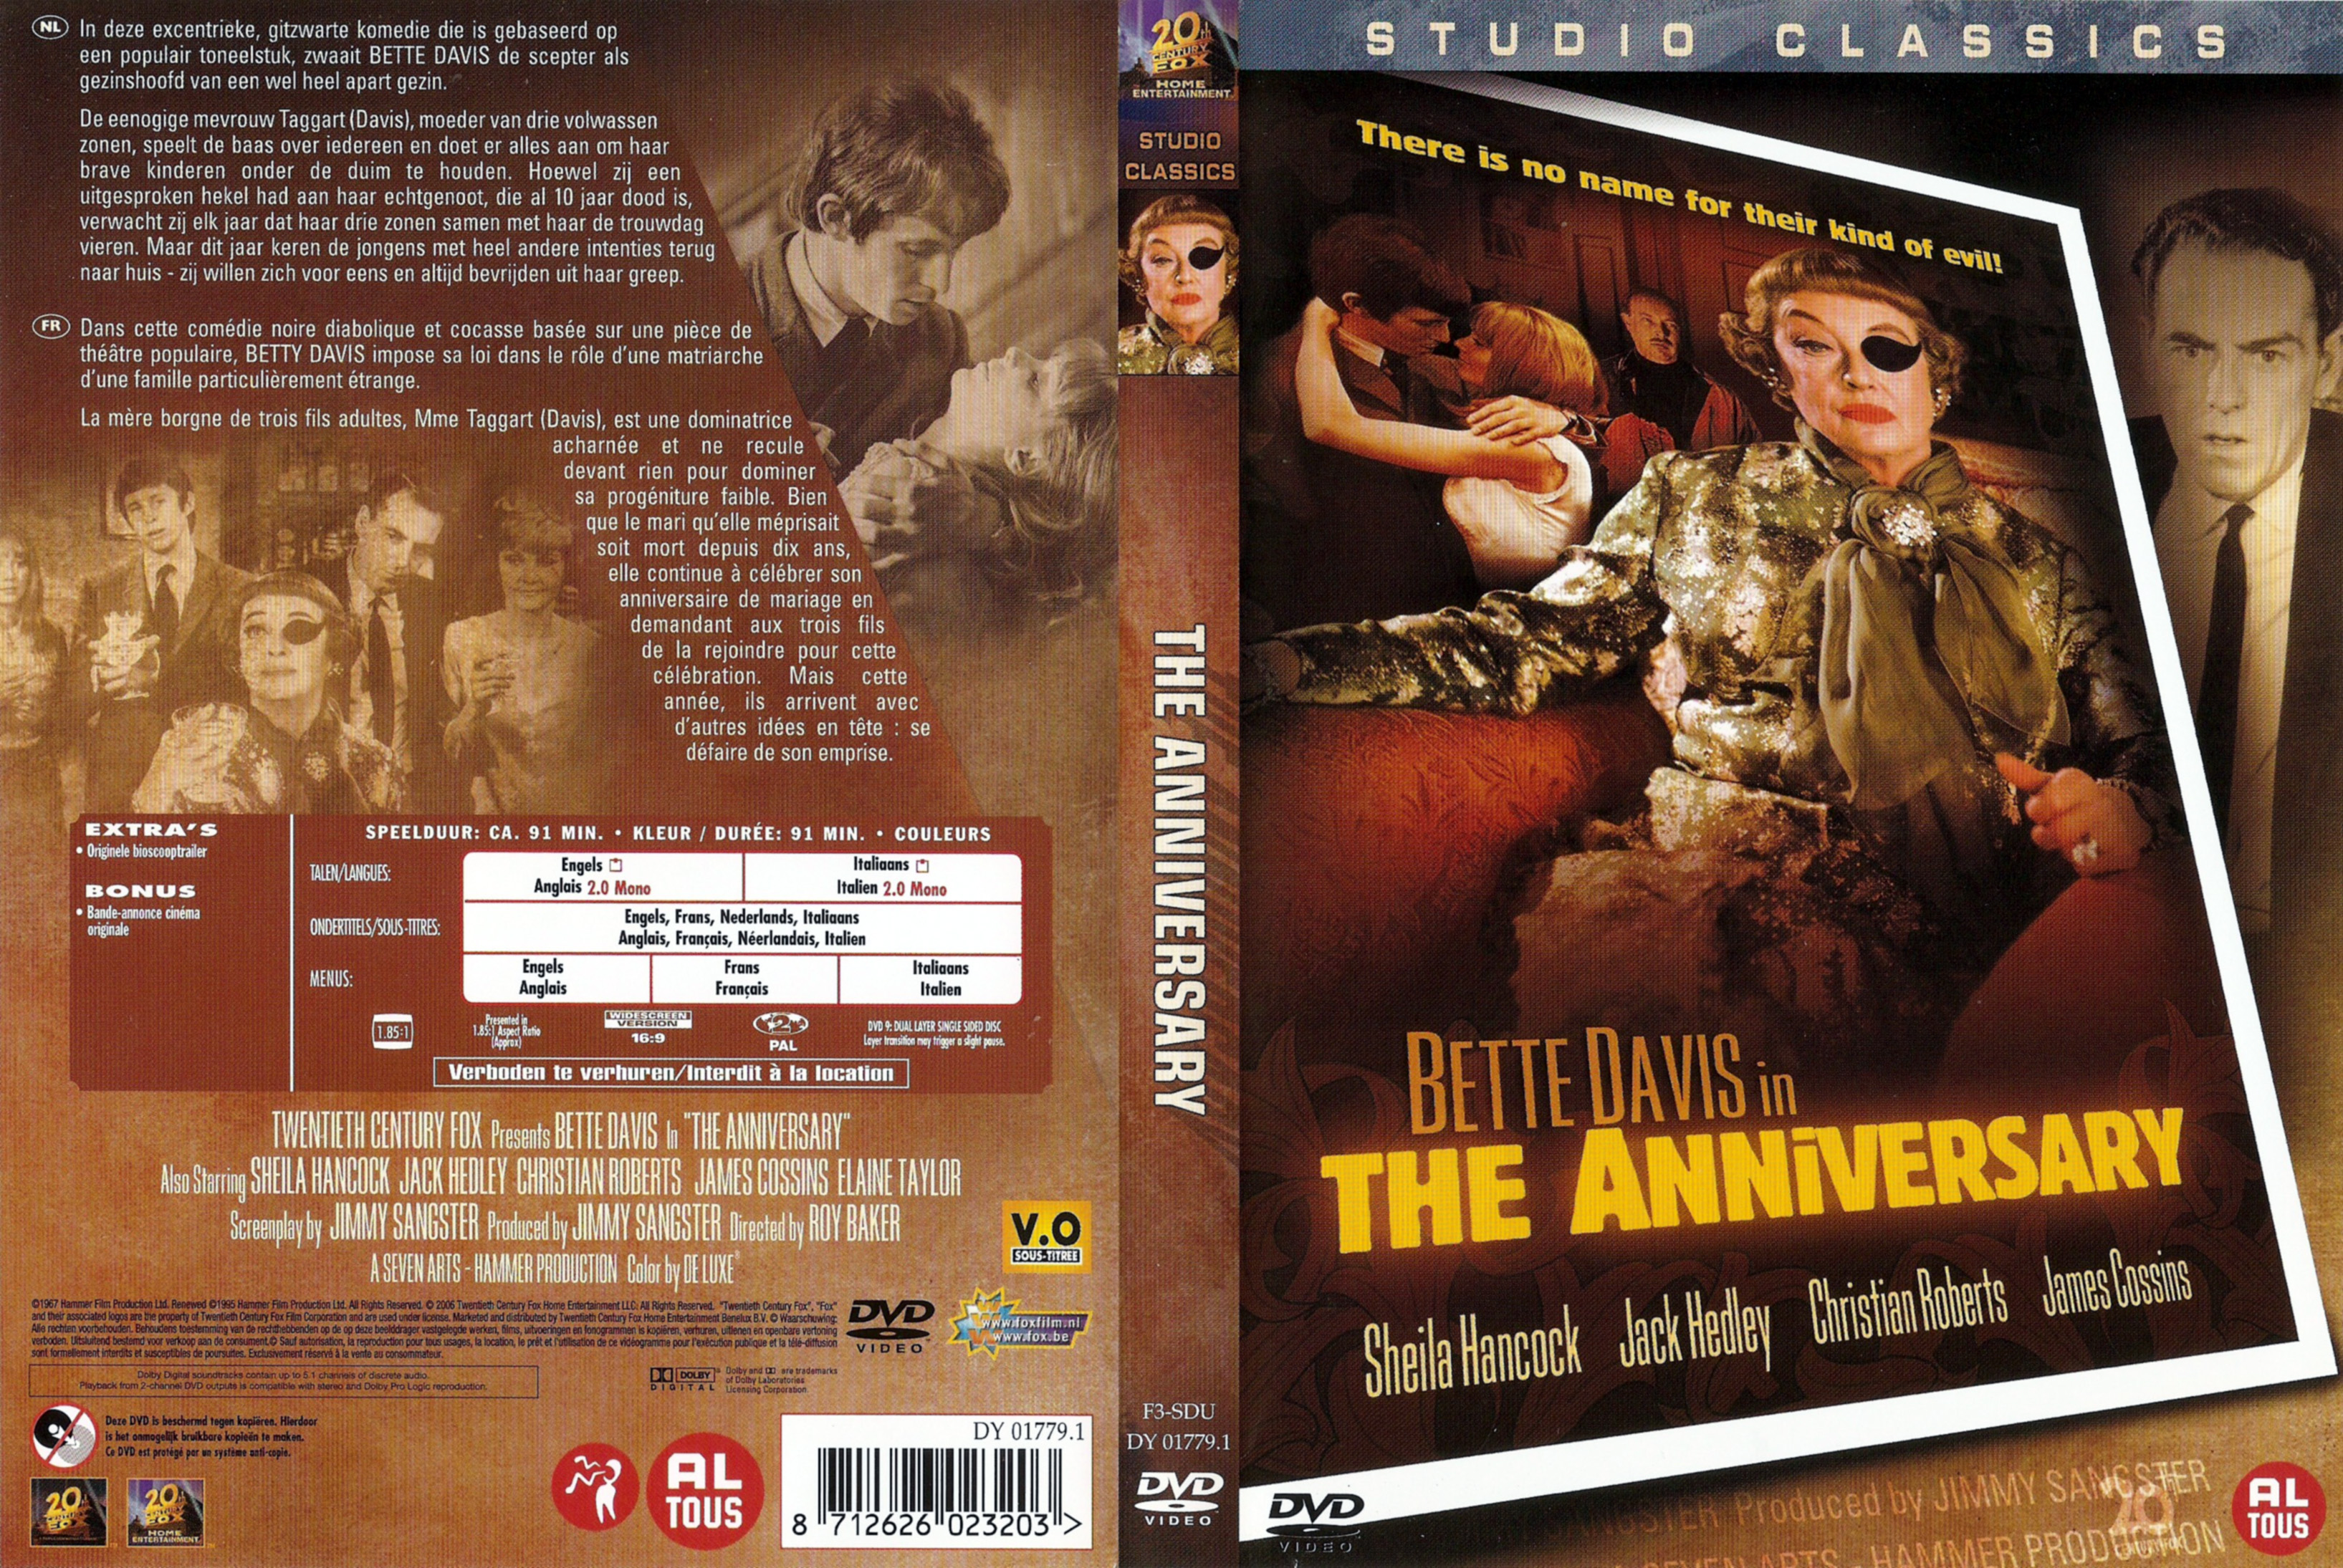 Jaquette DVD The anniversary